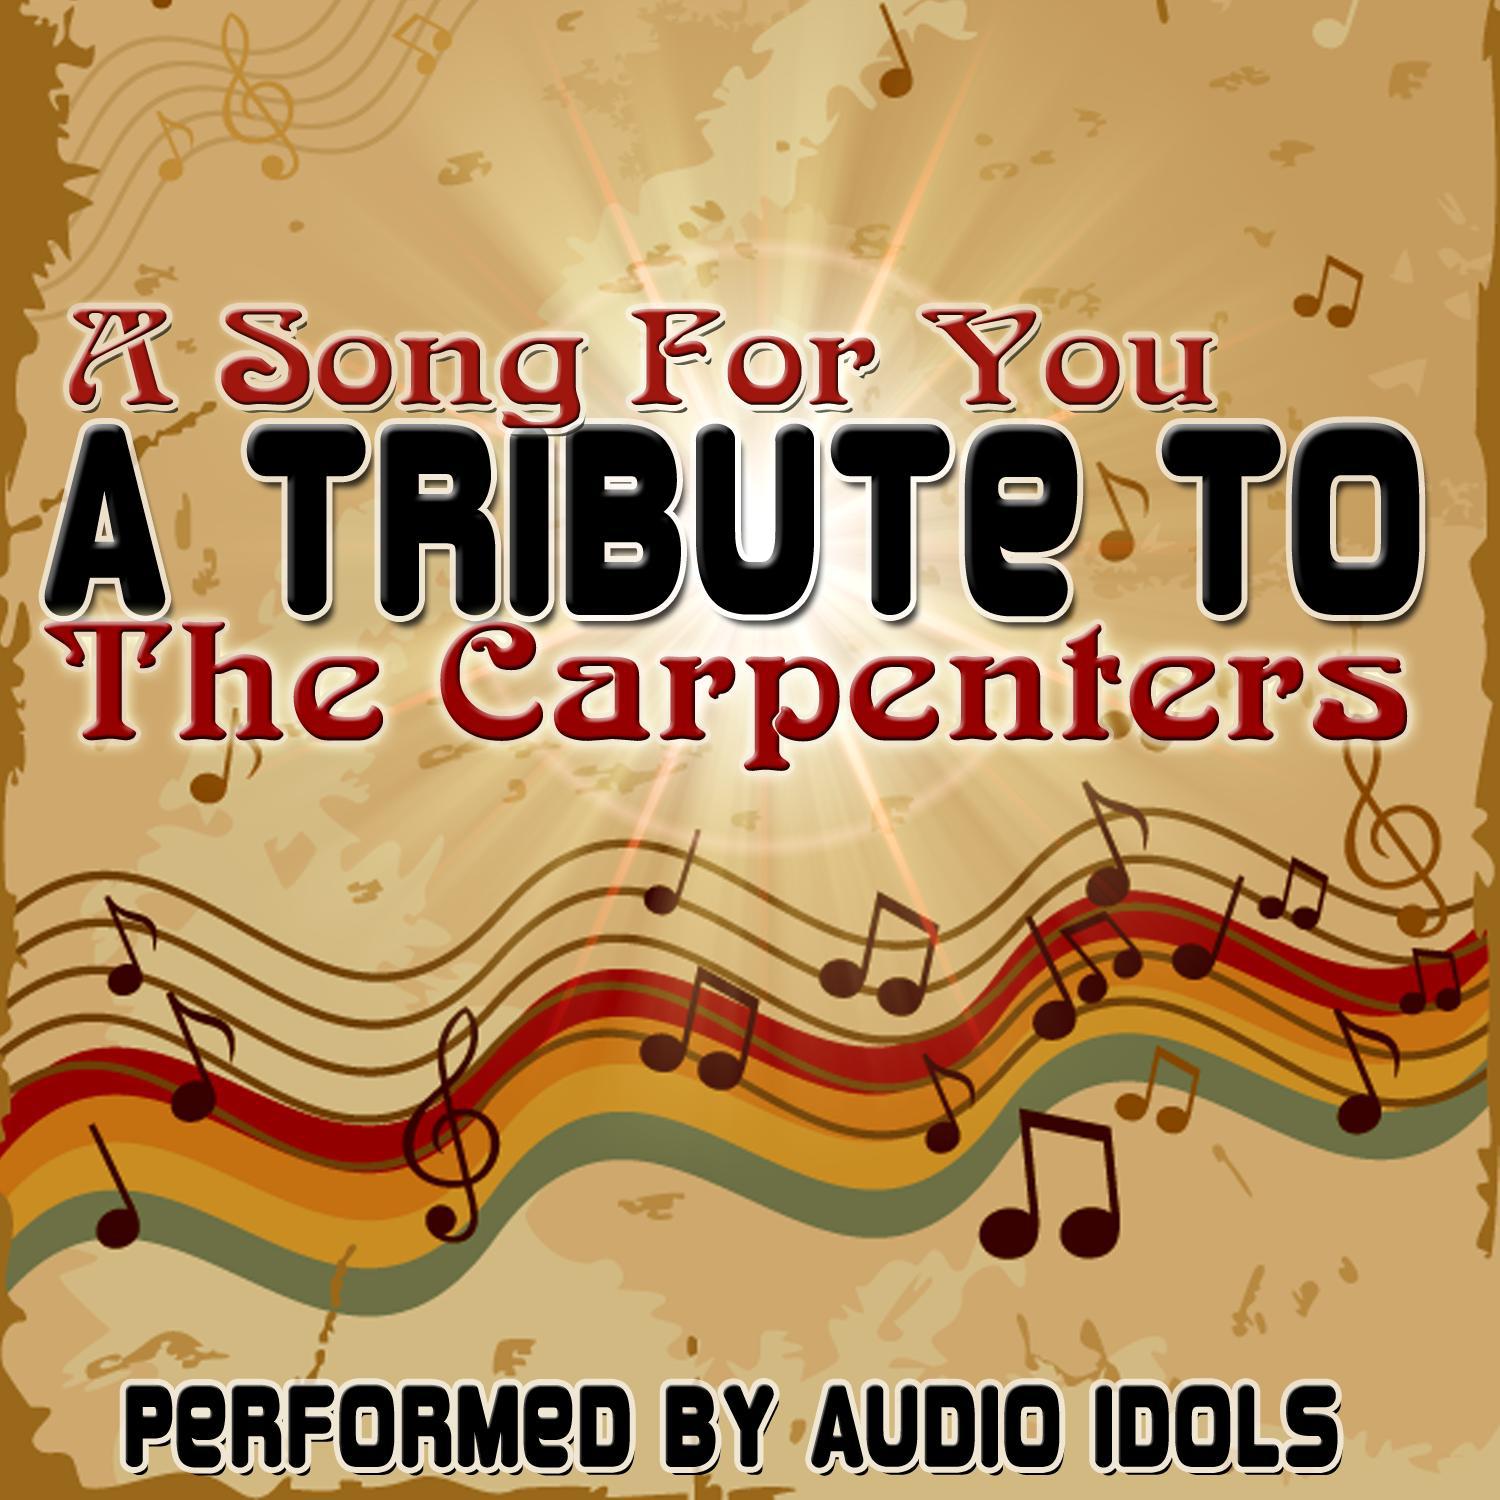 A Tribute To The Carpenters: A Song For You